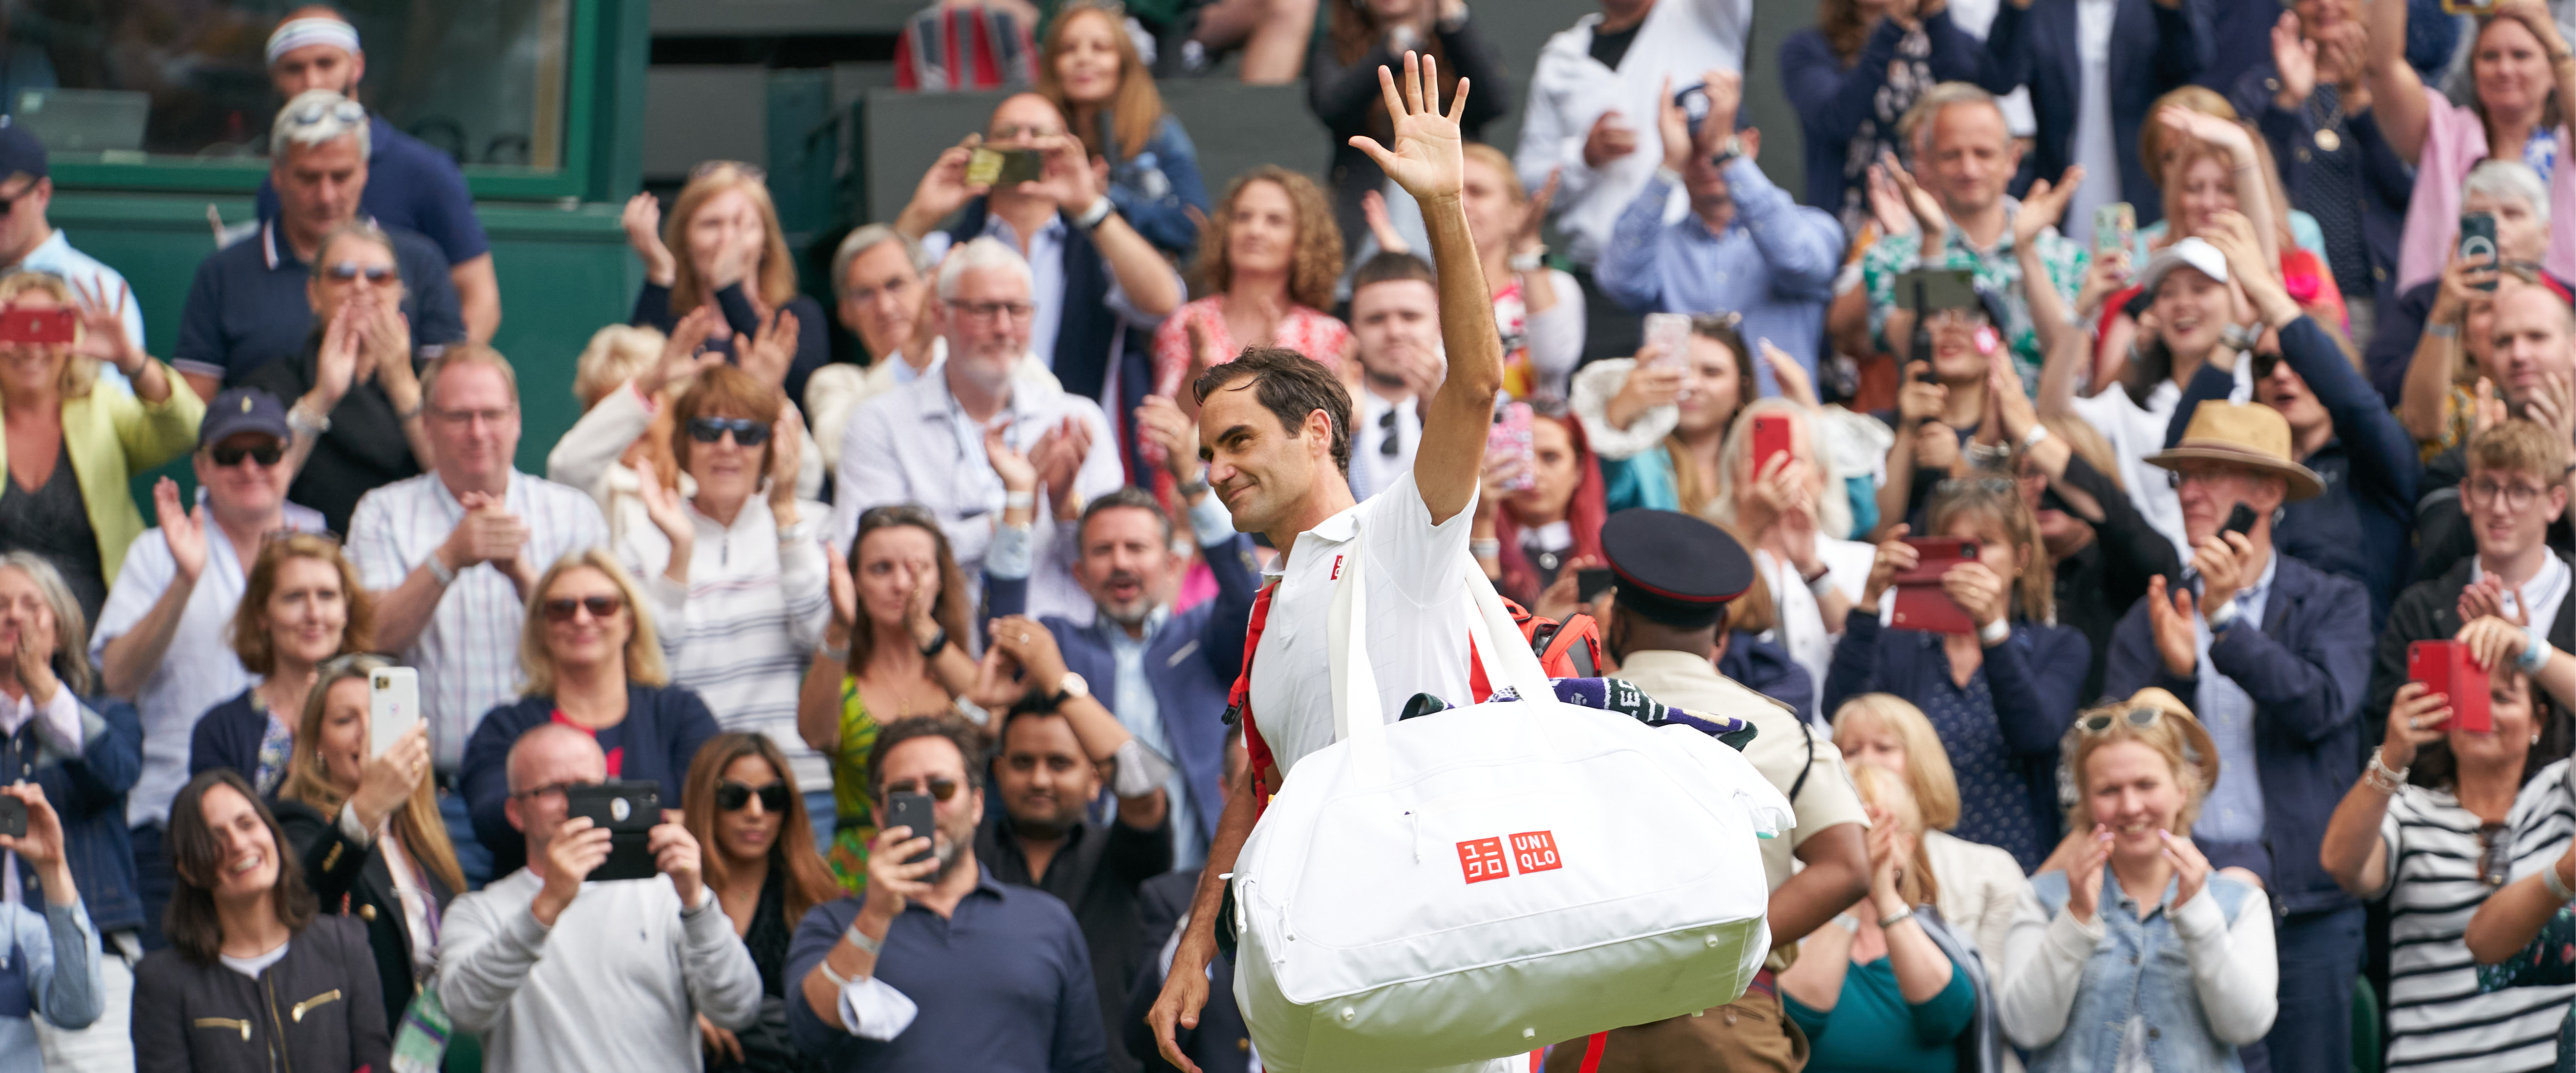 The end of an era - Roger Federer announces he will retire after the Laver Cup